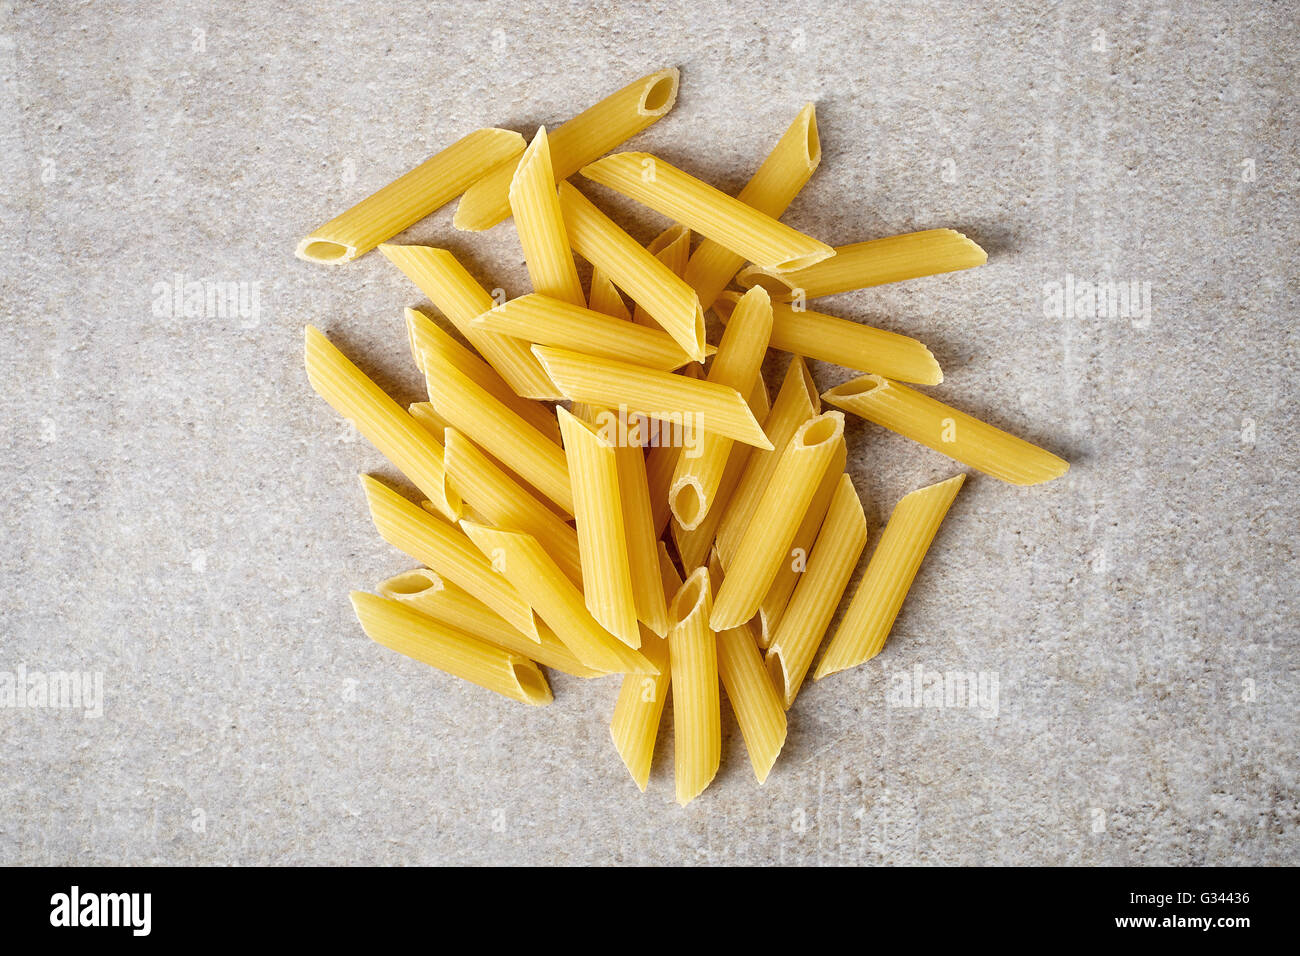 Penne pasta on stone table, top view Stock Photo